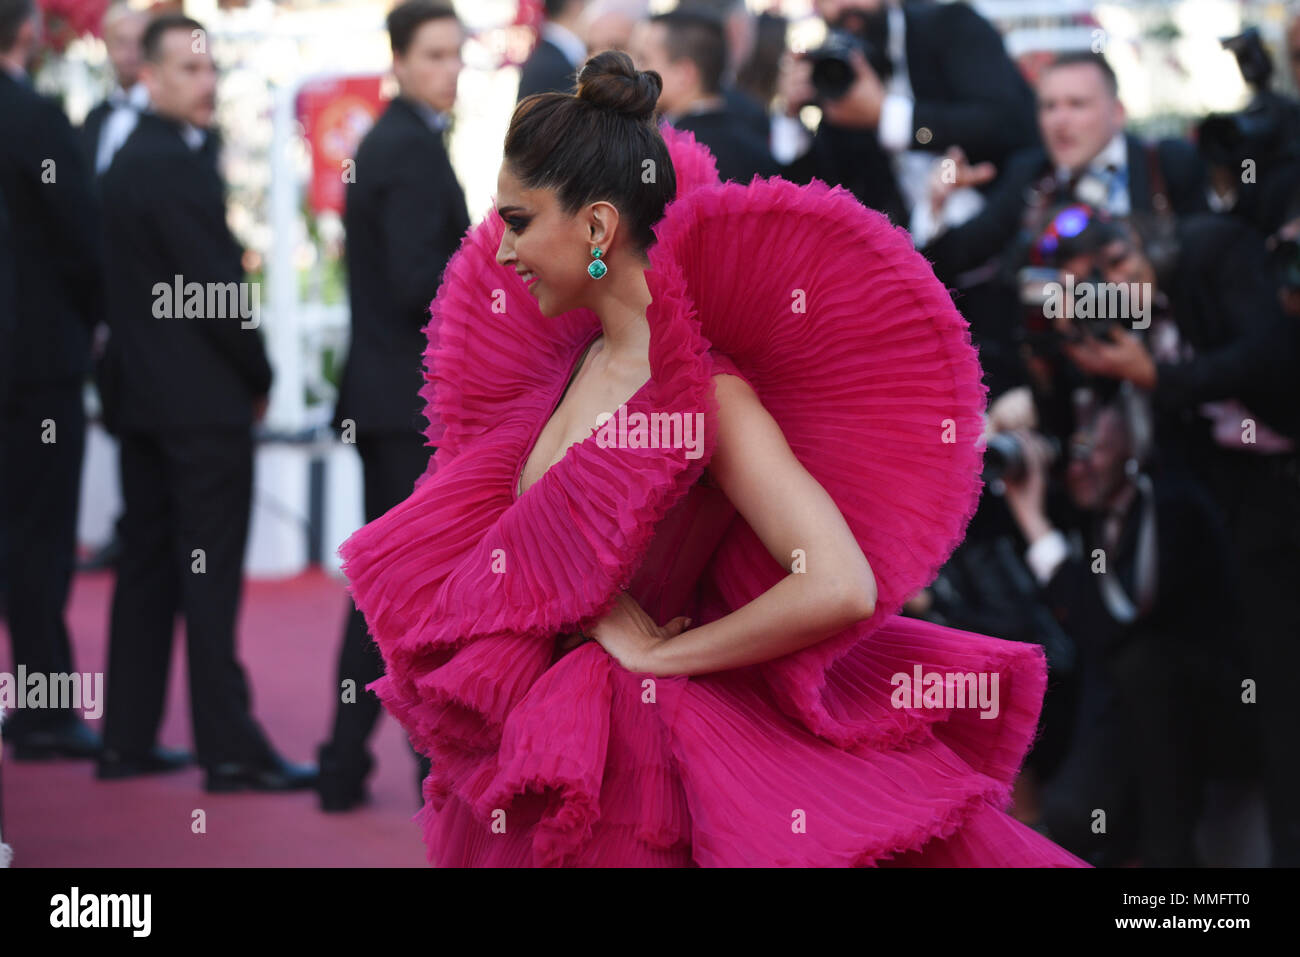 Cannes, France. May 11, 2018 - Cannes, France: Deepika Padukone attends the 'Ash is the Purest White' premiere during the 71st Cannes film festival. Credit: Idealink Photography/Alamy Live News Stock Photo